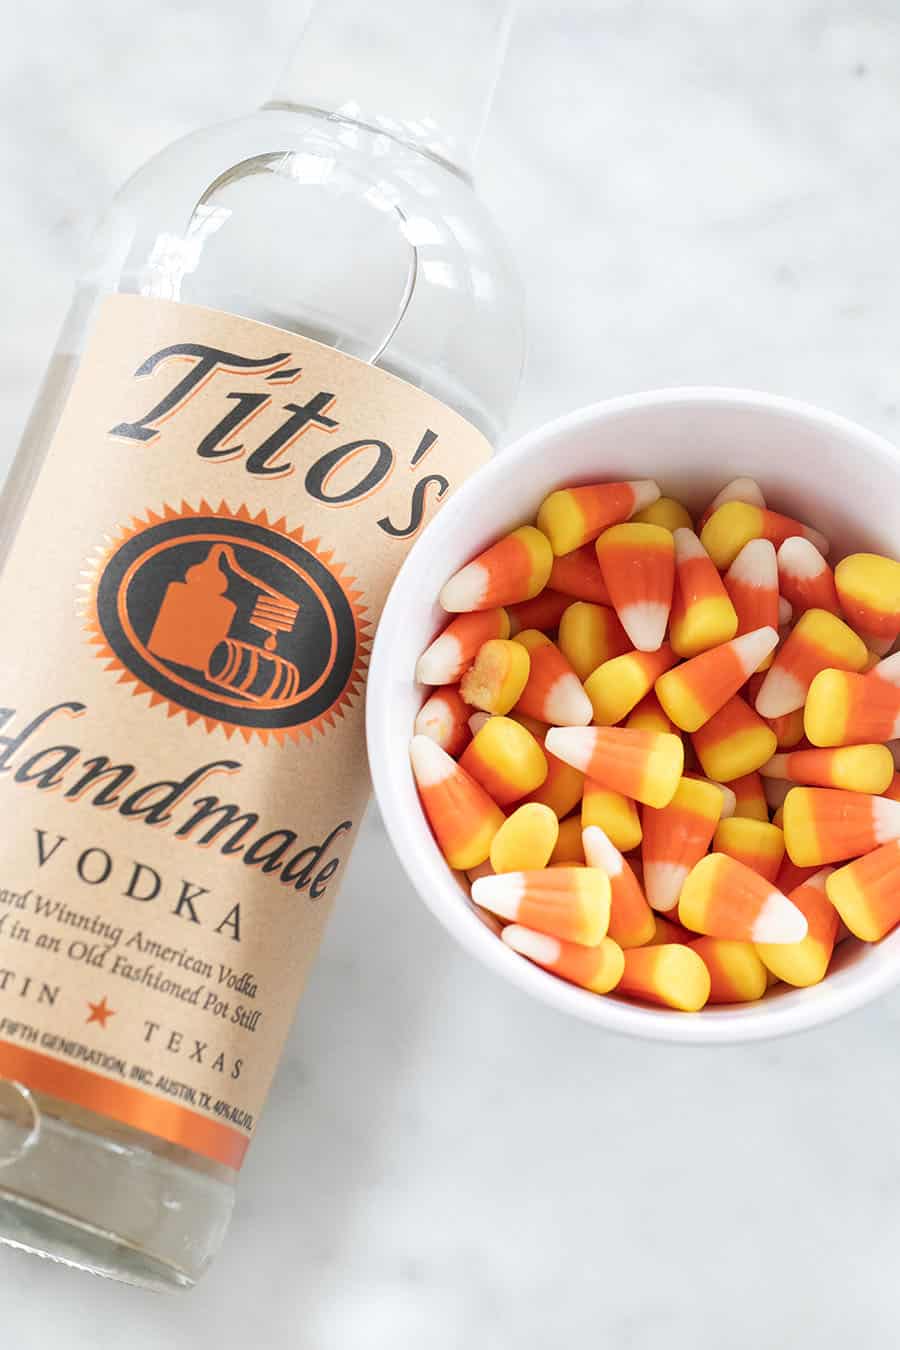 Titos vodka and candy corn